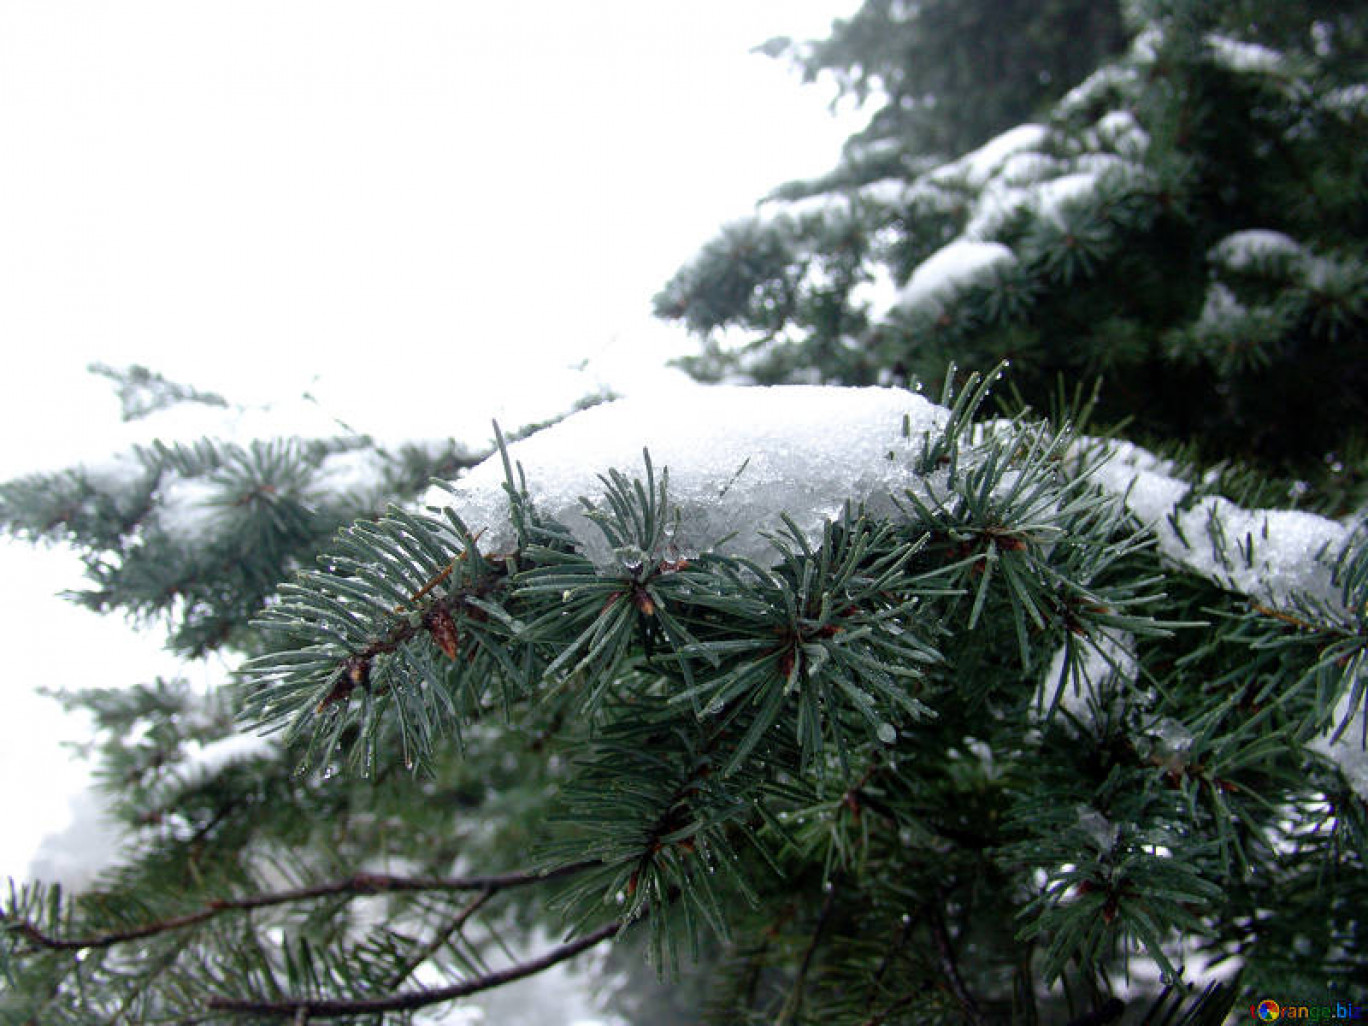 Free picture (Spruce branches with snow caps and drops) from https://torange.biz/spruce-branches-snow-caps-drops-398